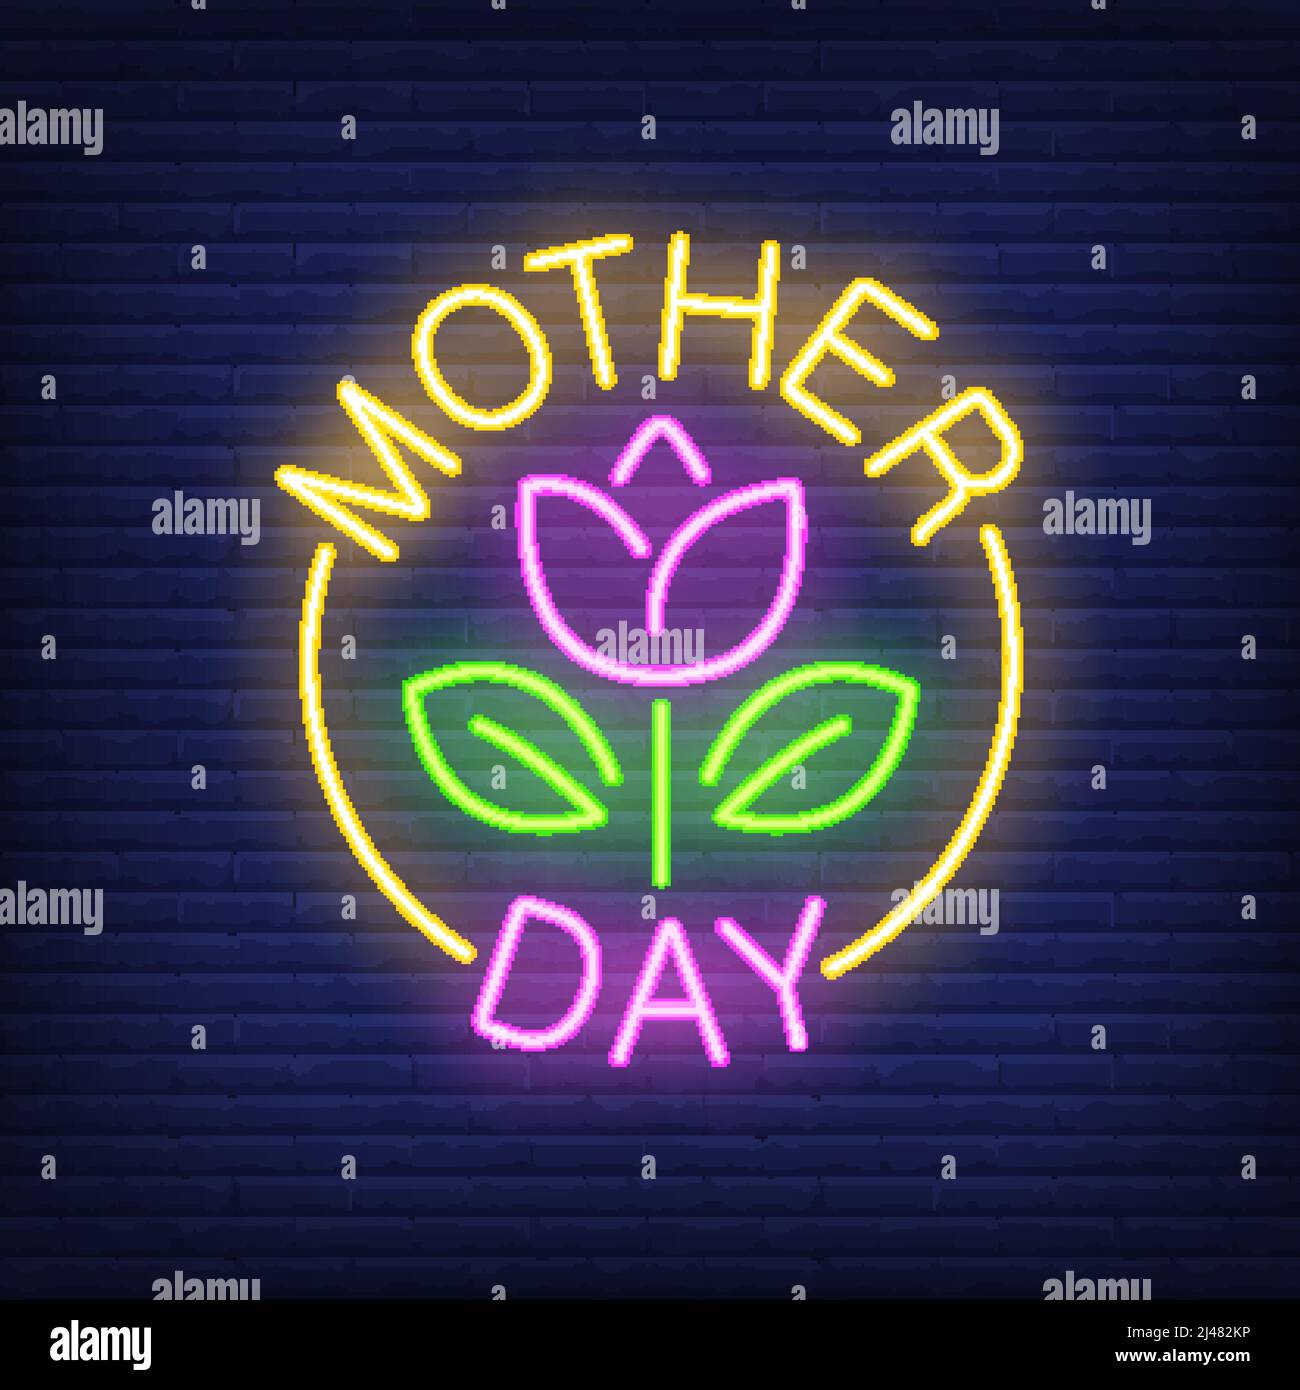 Mother day neon sign. Flower with leaves in bright yellow round. Night bright advertisement. Vector illustration in neon style for holiday and materni Stock Vector